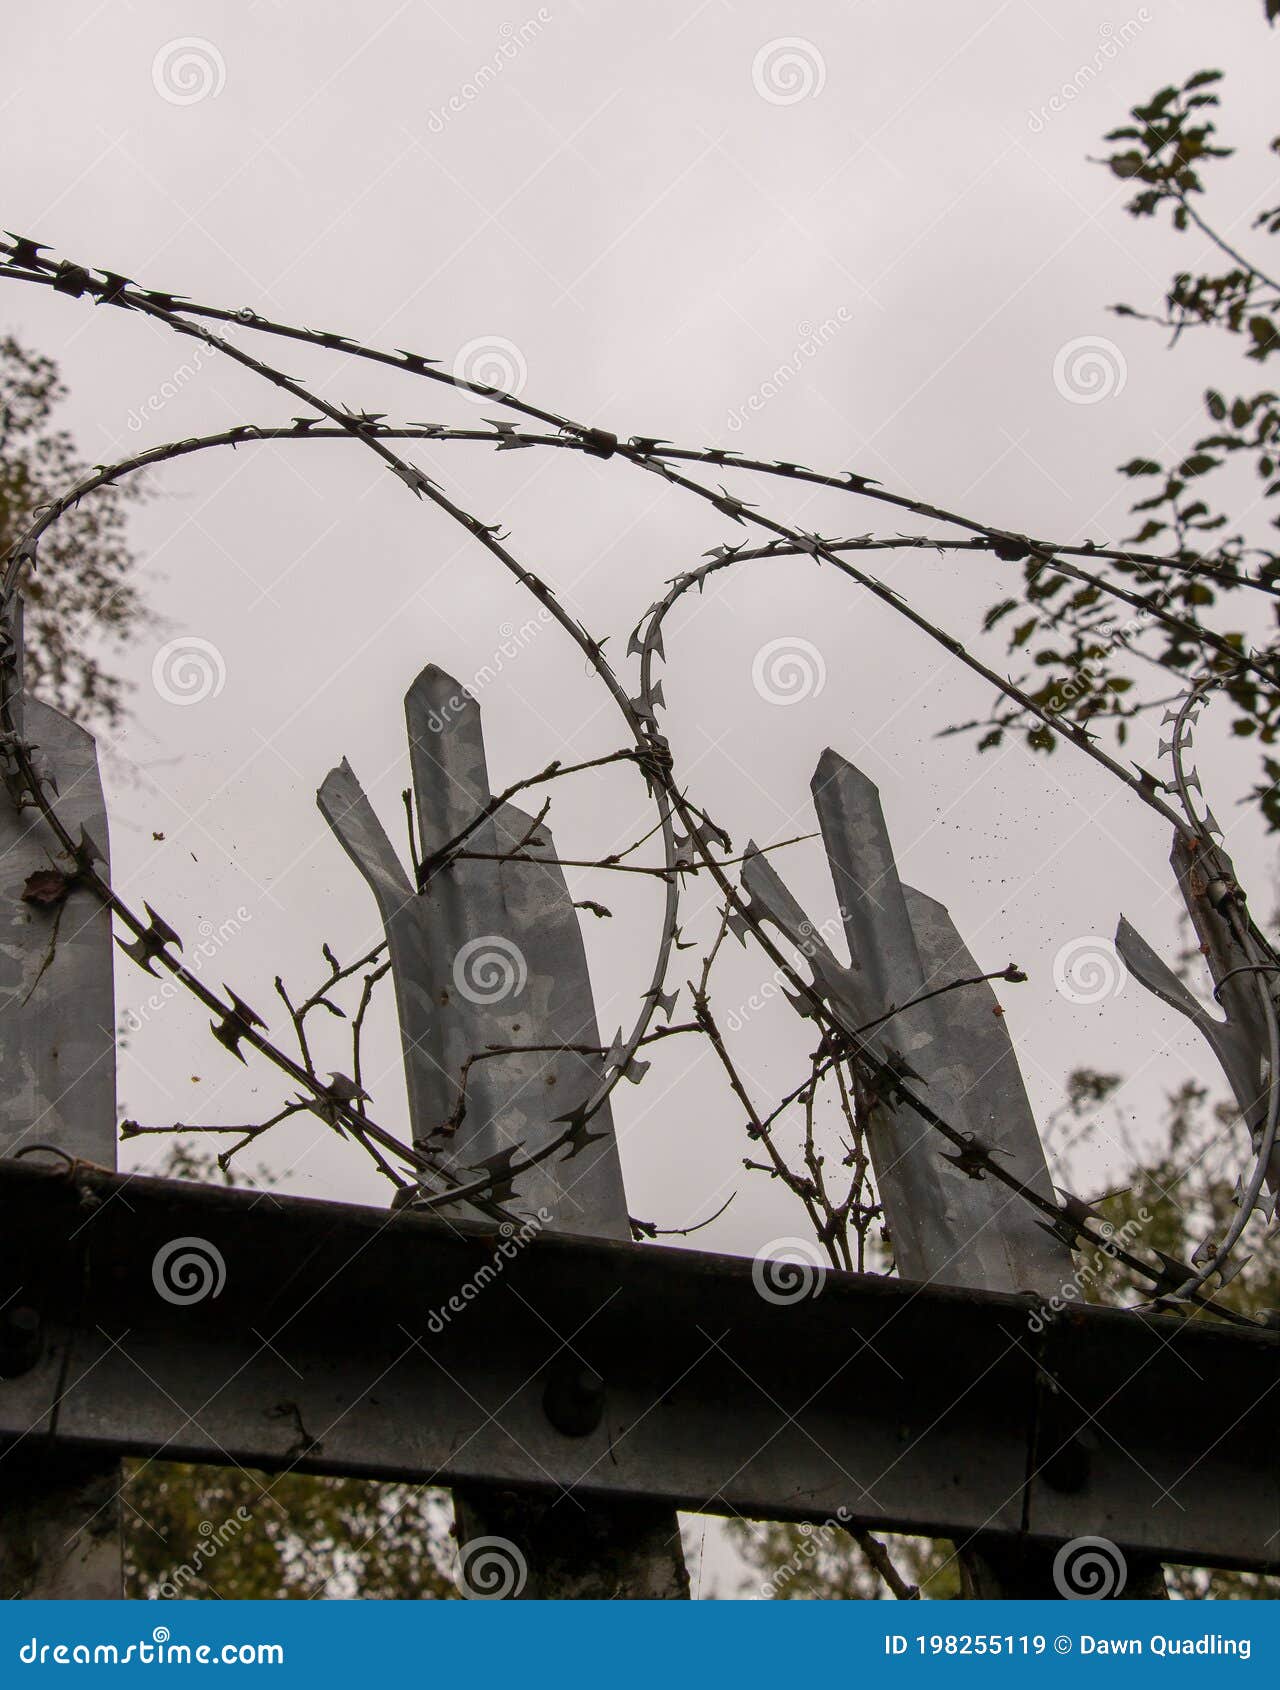 razor wire, high security barbed wire to stop intruders climbing fences